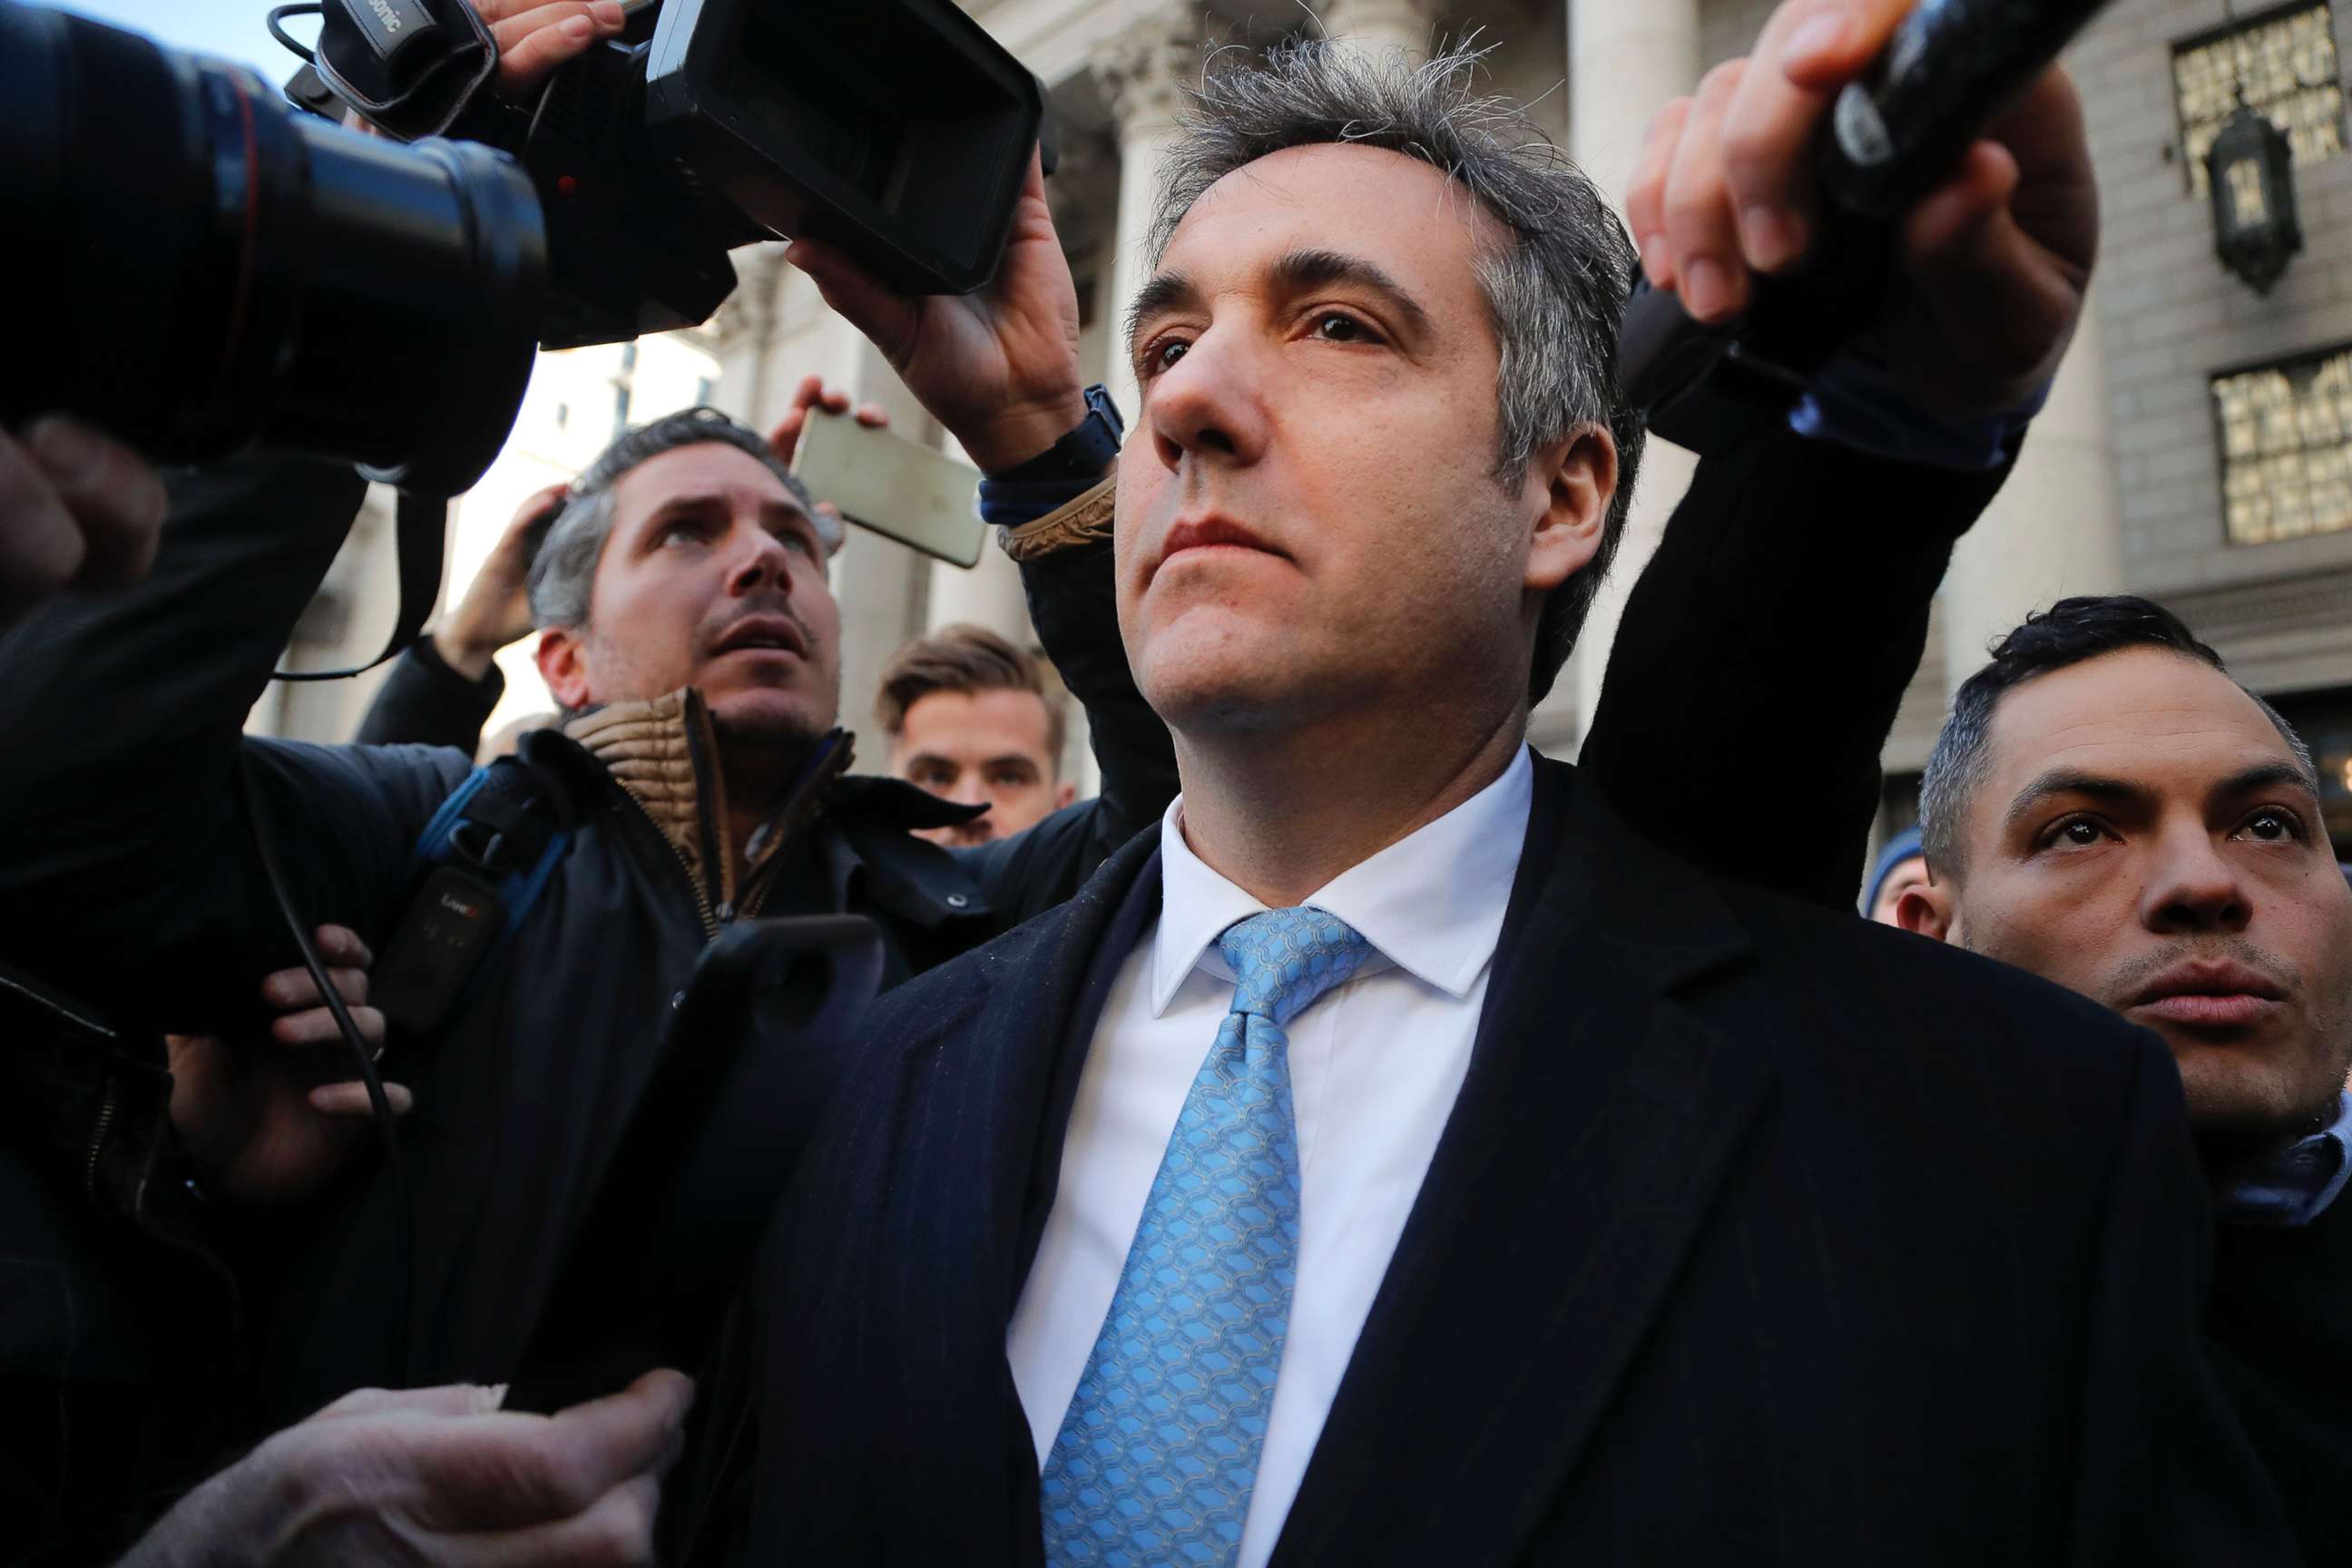 PHOTO: Michael Cohen walks out of federal court in New York, Nov. 29, 2018.